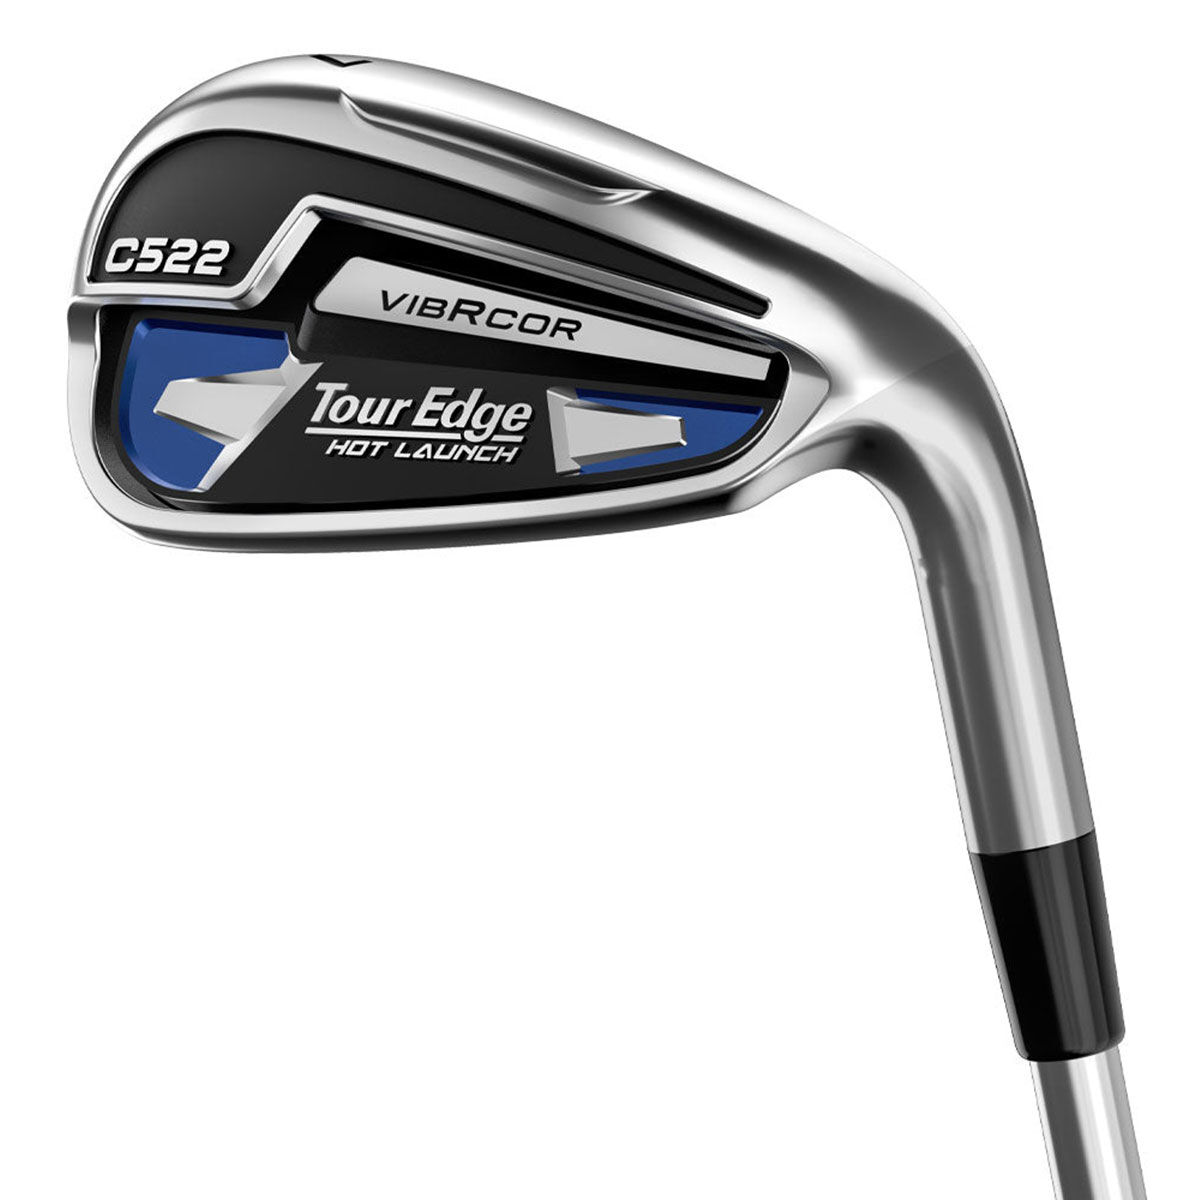 Tour Edge Silver and Black Hot Launch C522 Right Hand Graphite 5-pw (6 Golf Irons), Size: Regular | American Golf